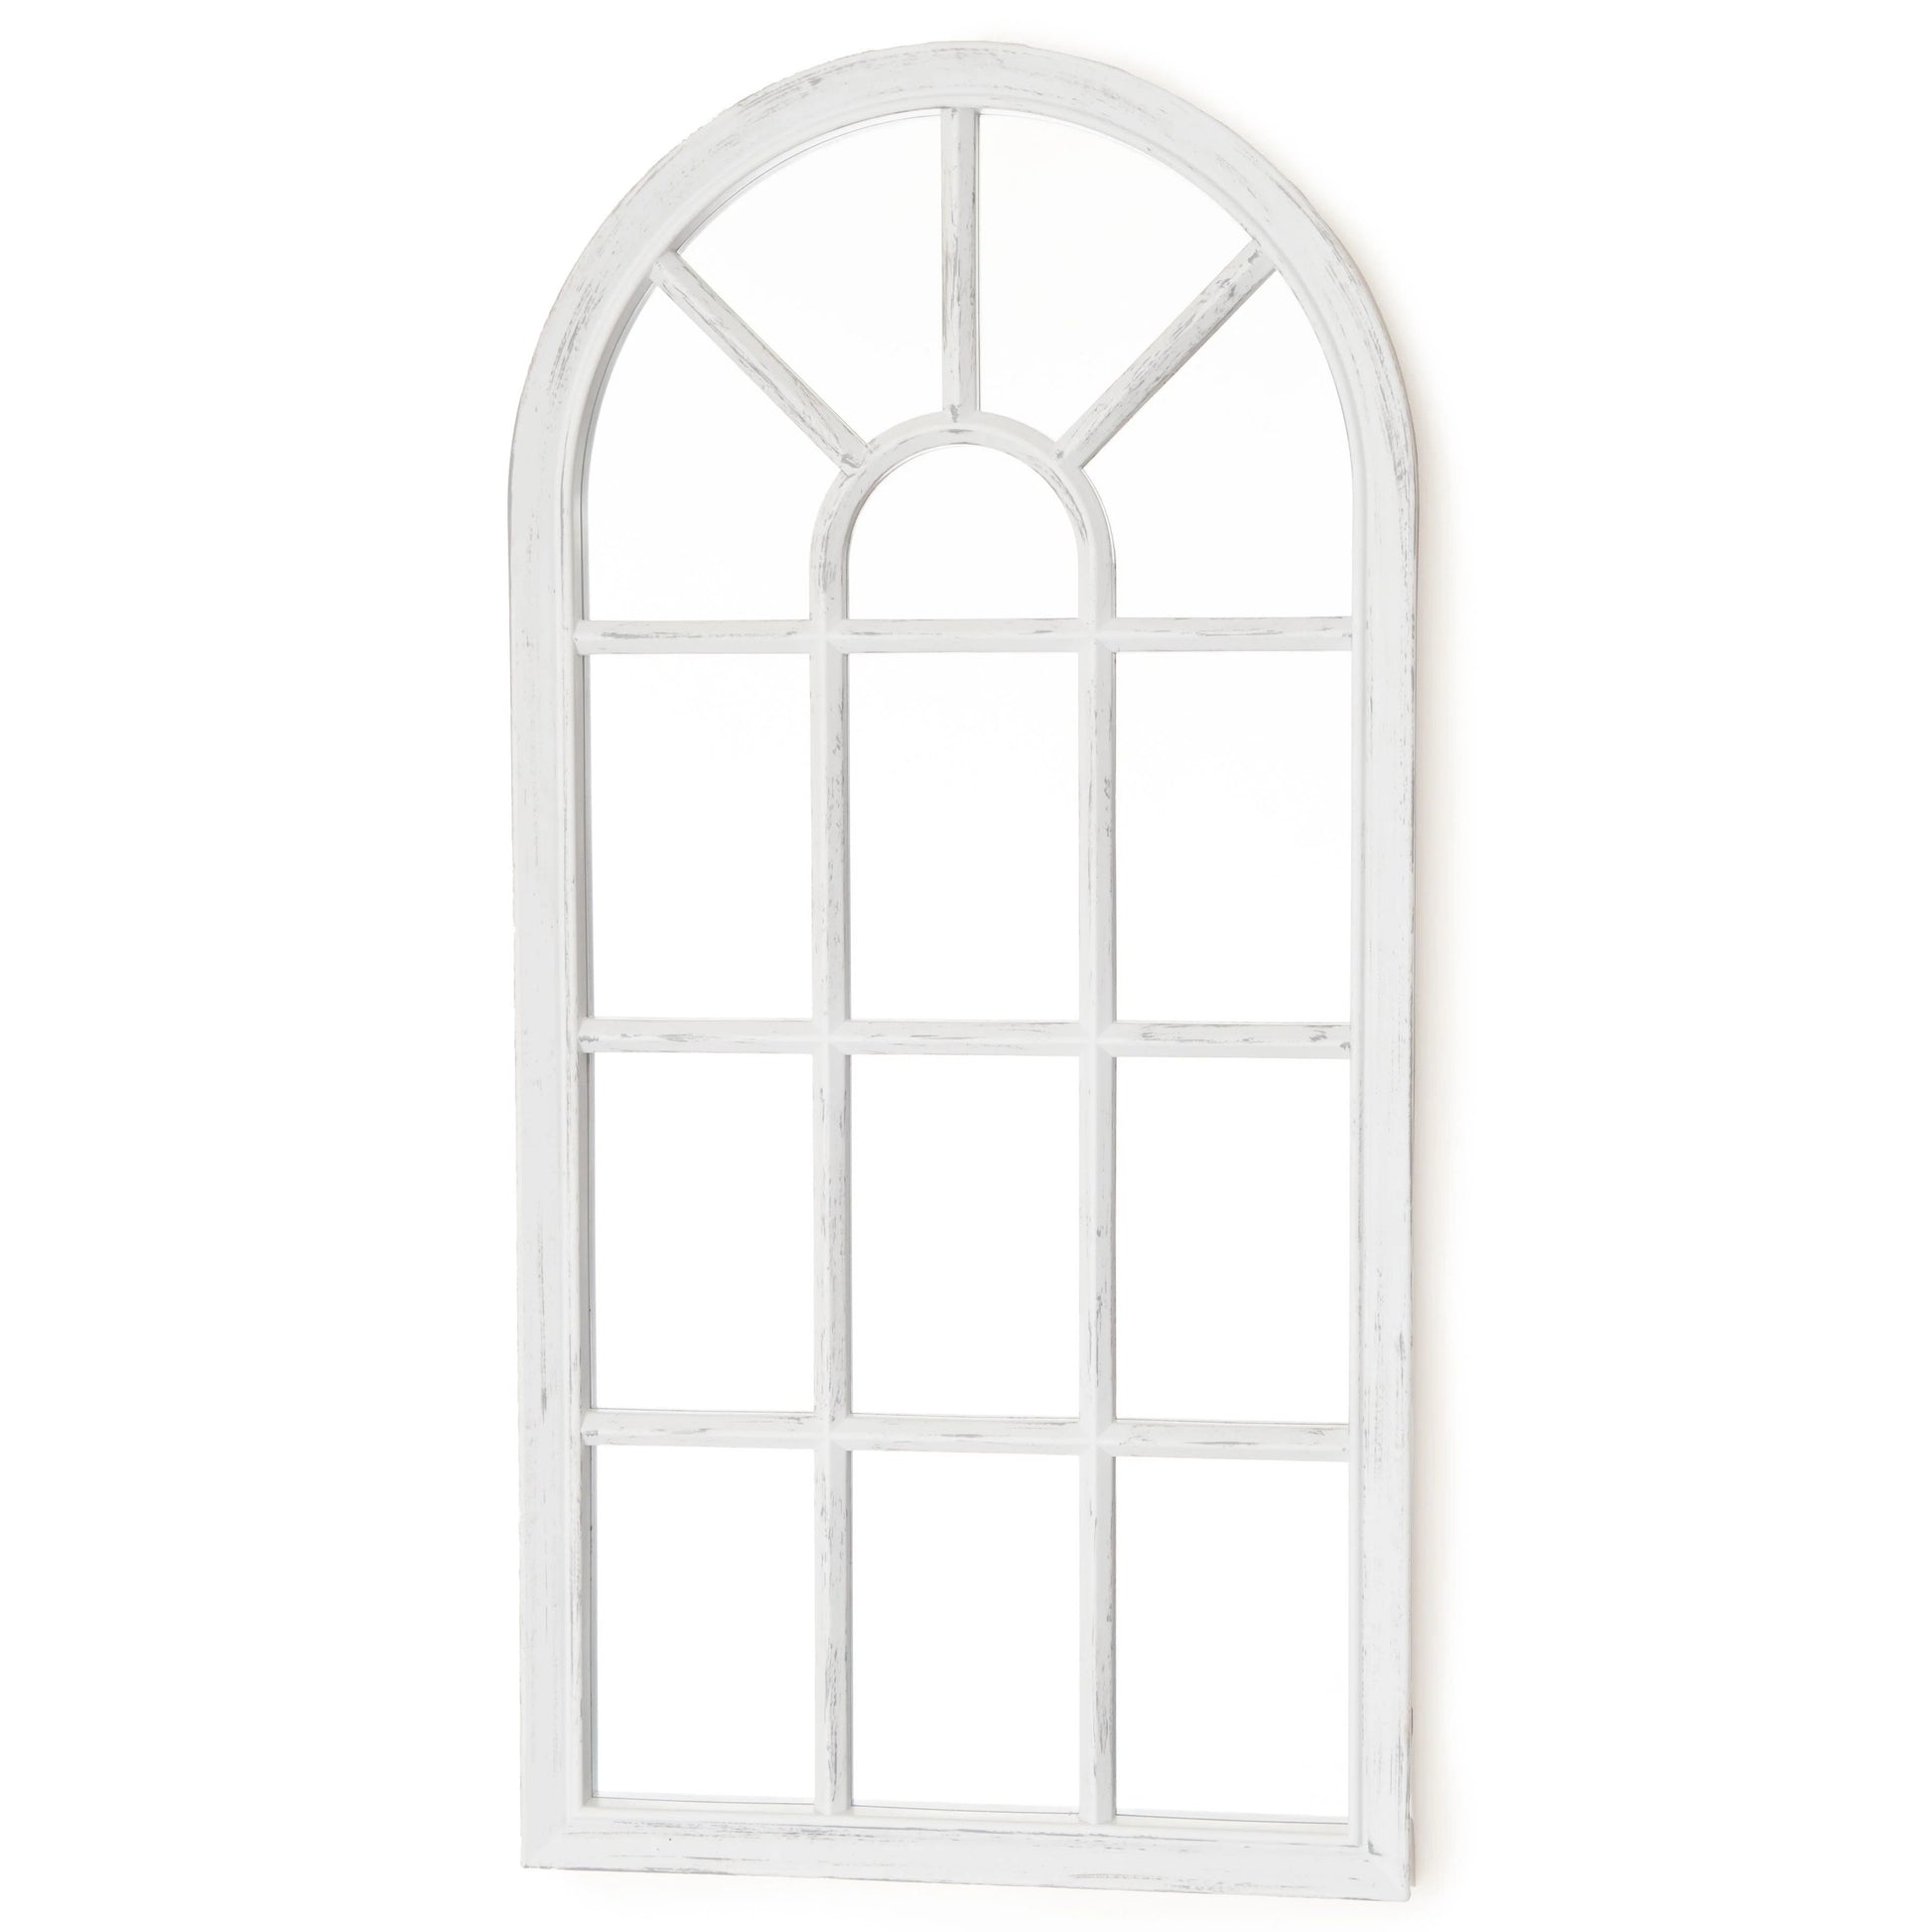 Large Arched Garden Wall Mirror - Modena White